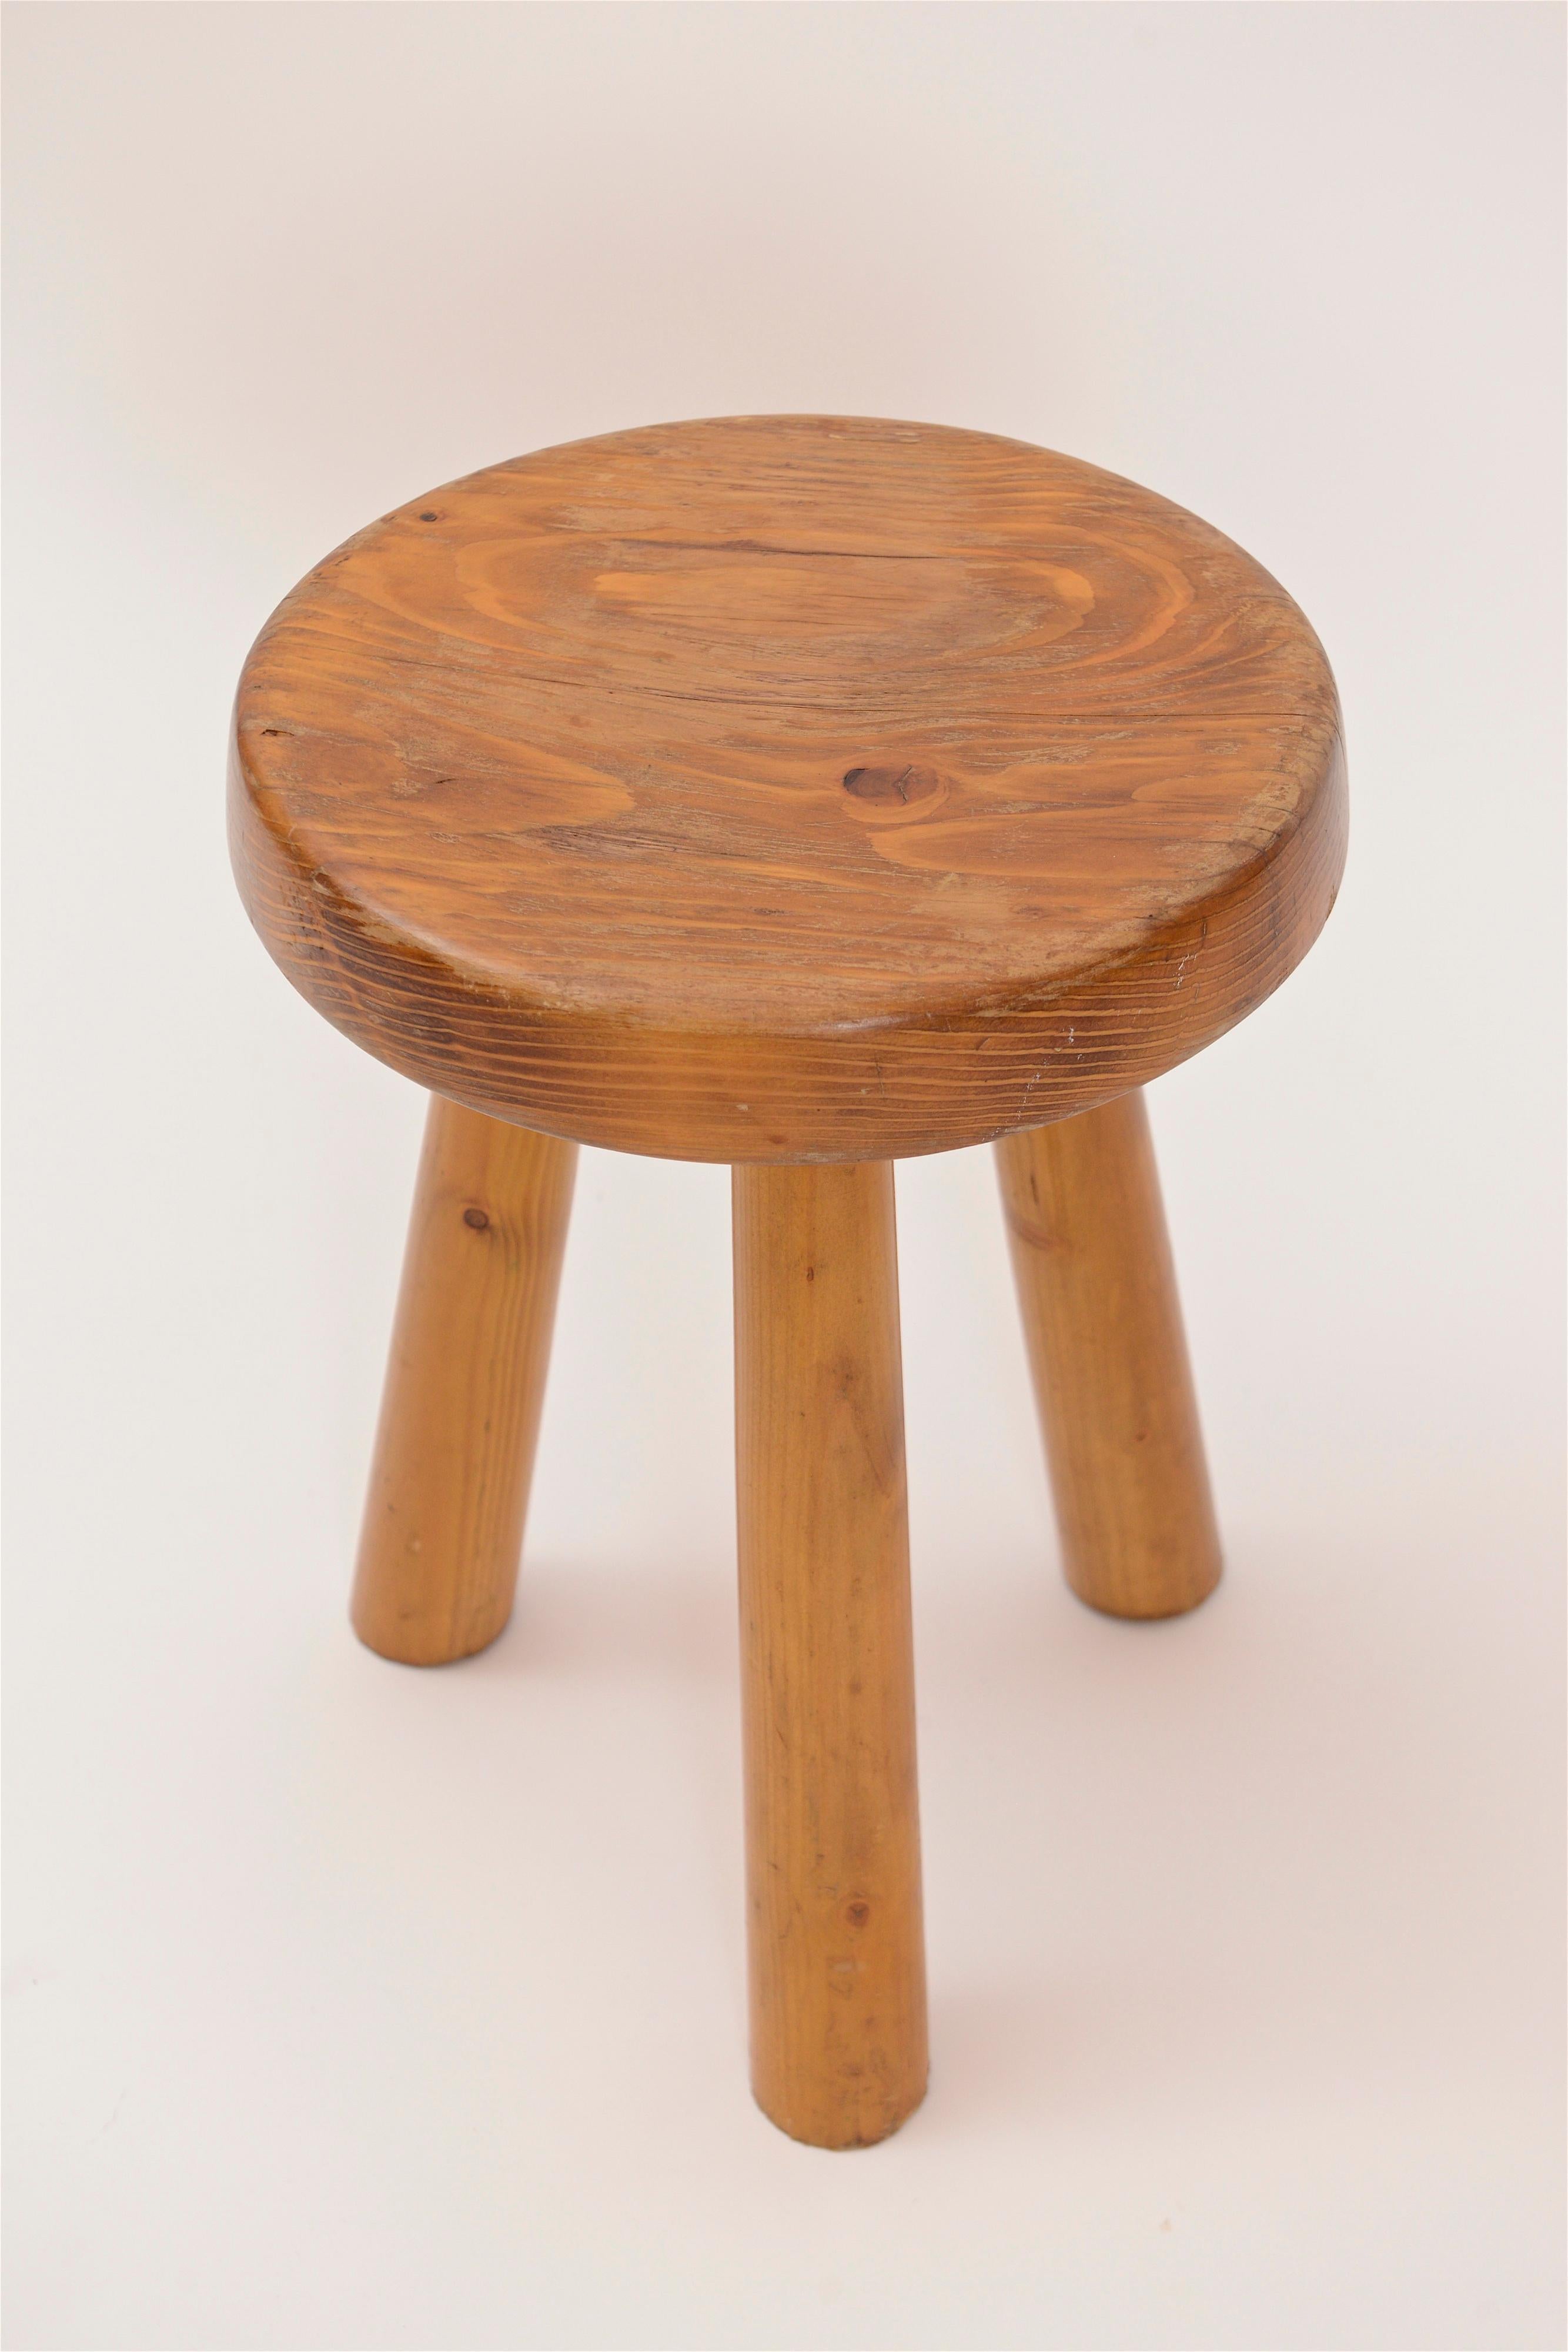 A beautifully simple three-legged pine stool designed by Charlotte Perriand, circa 1960. Produced for the famous French ski resort, ‘Les Arcs’, in the early sixties, these stools have become a design classic and an iconic piece within the Perriand